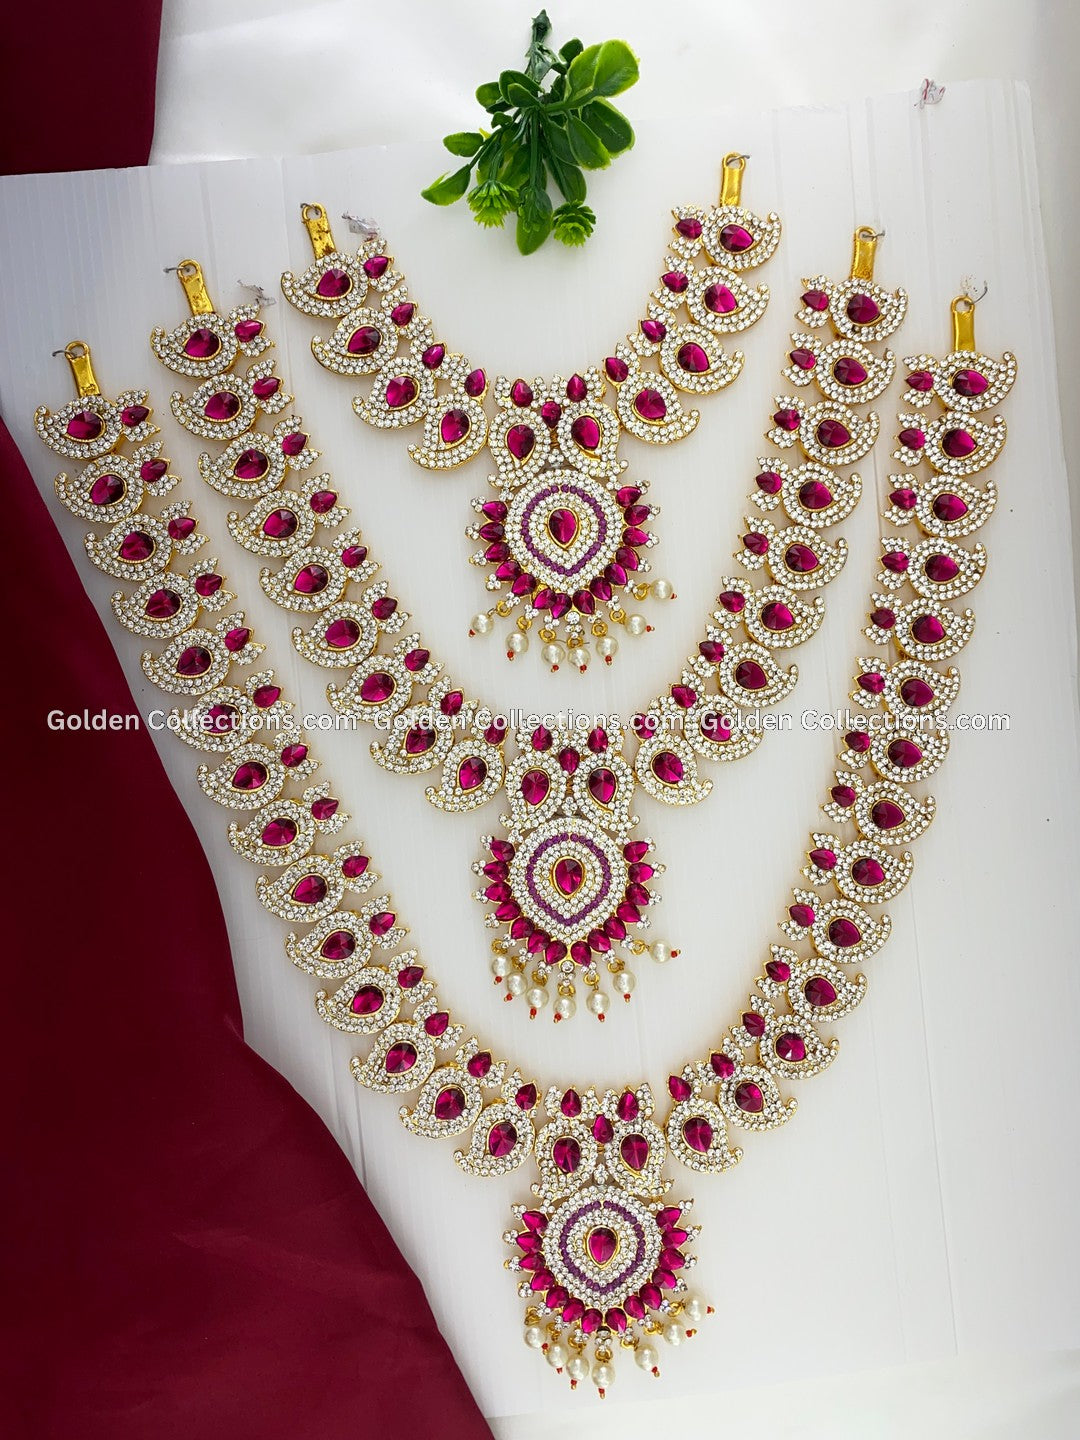 Explore Divine Jewellery for Goddesses-GoldenCollections